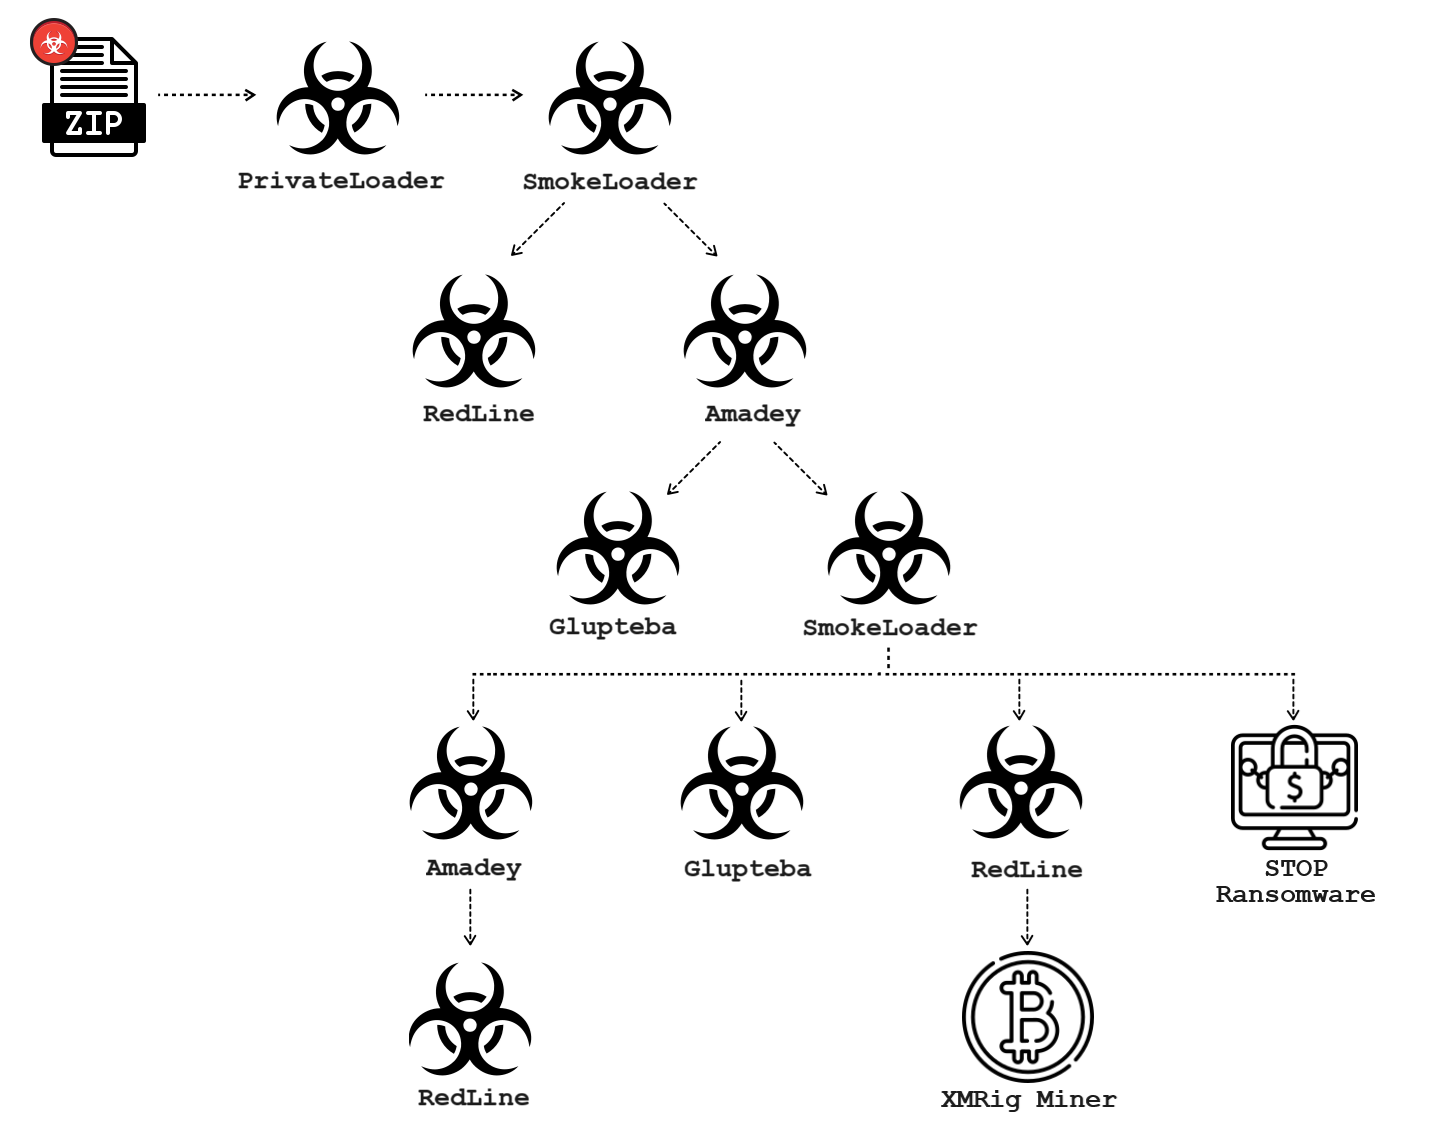 Image 5 is a tree diagram of a malware infection that starts with a ZIP file, distributes different loaders such as PrivateLoader, SmokeLoader and RedLine Stealer among others, and distributes Glupteba at branches 3 and 4. Finally there are icons for XMRig Miner and STOP ransomware. 